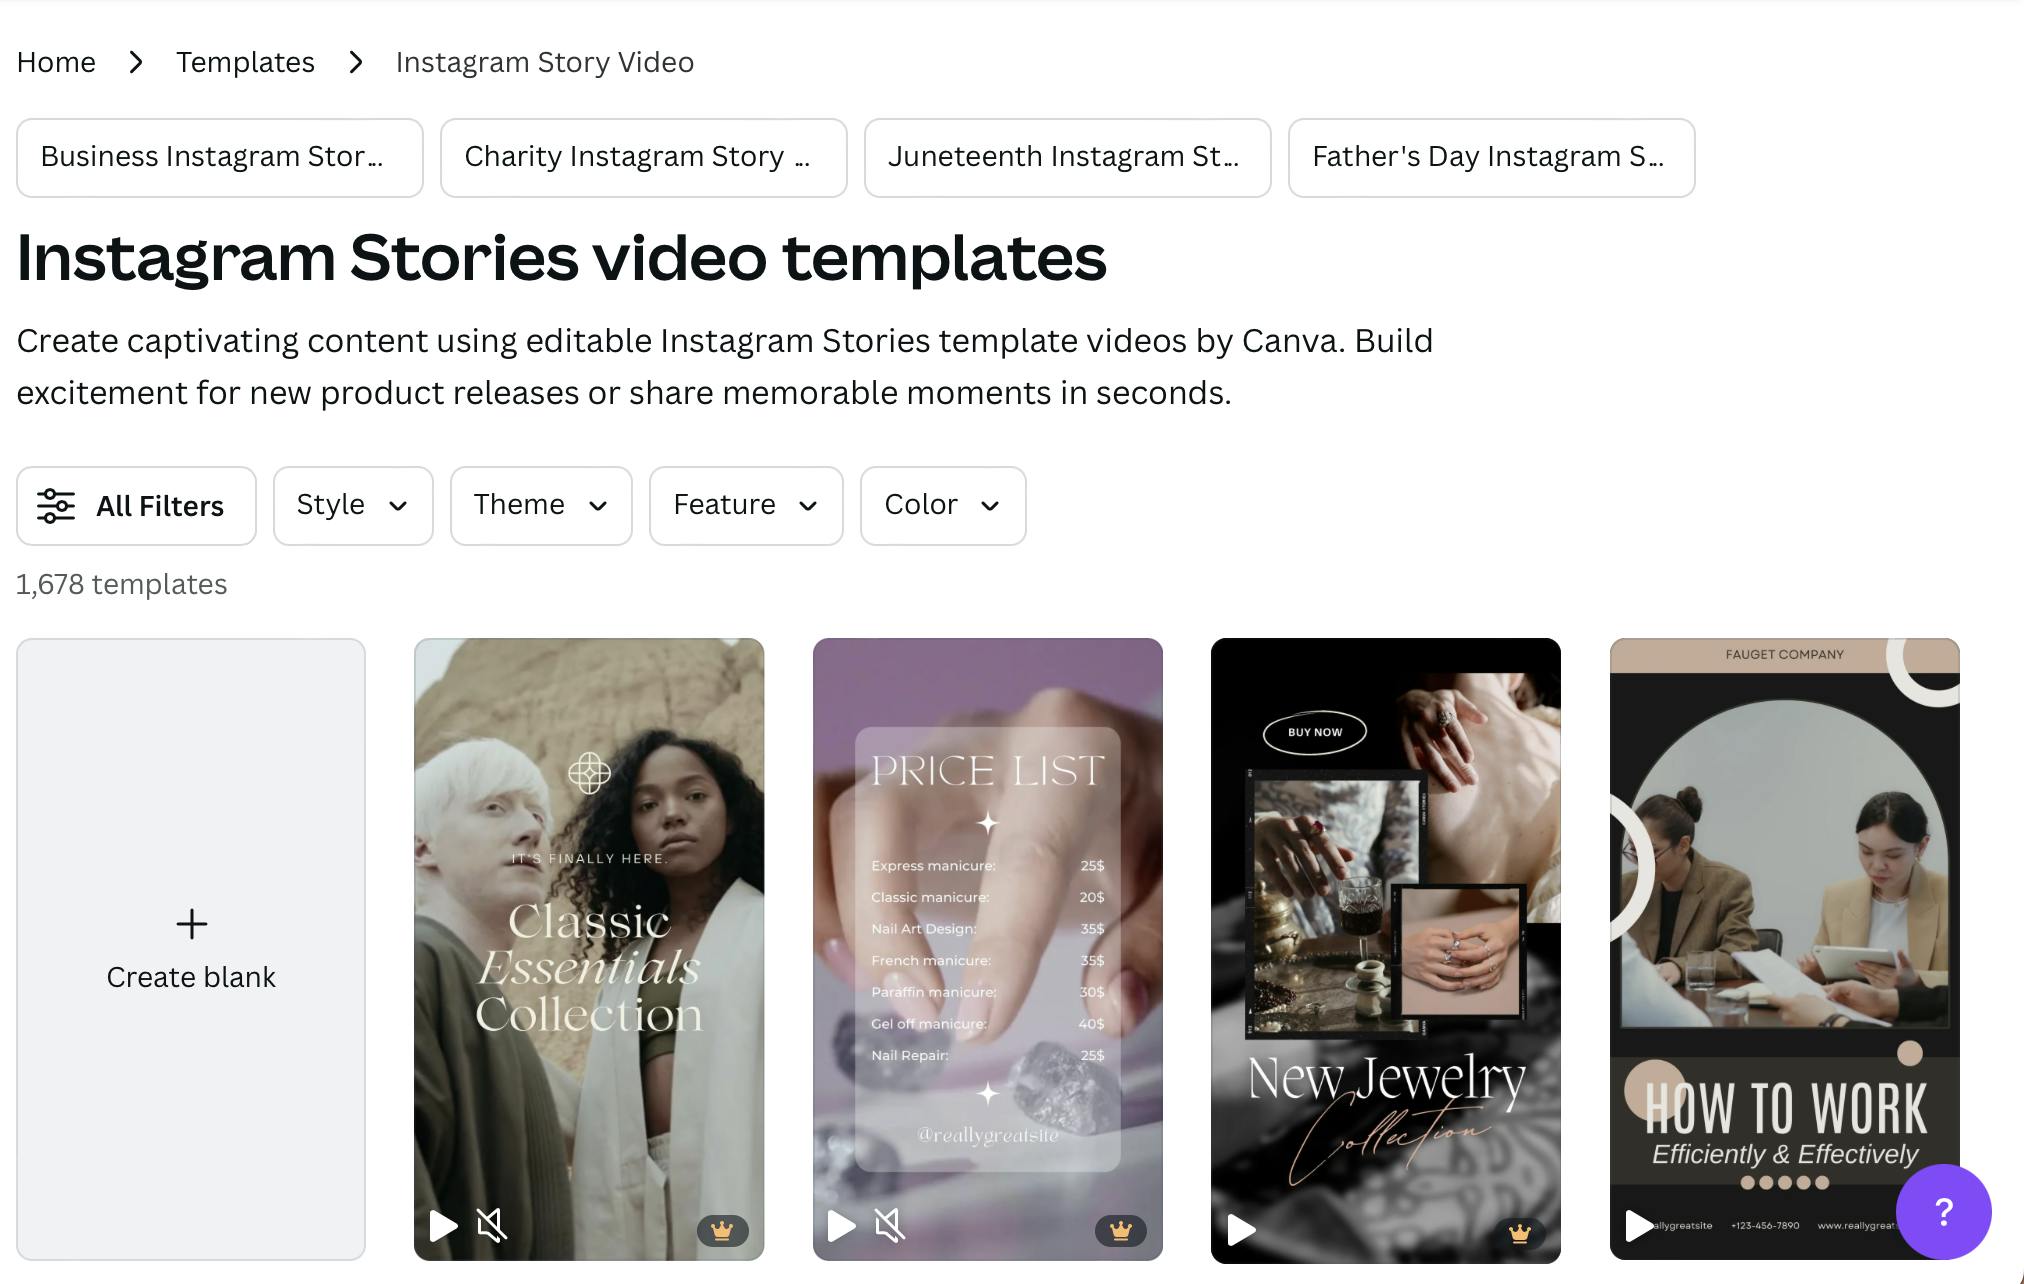 A selection of Instagram stories video templates in Canva.com